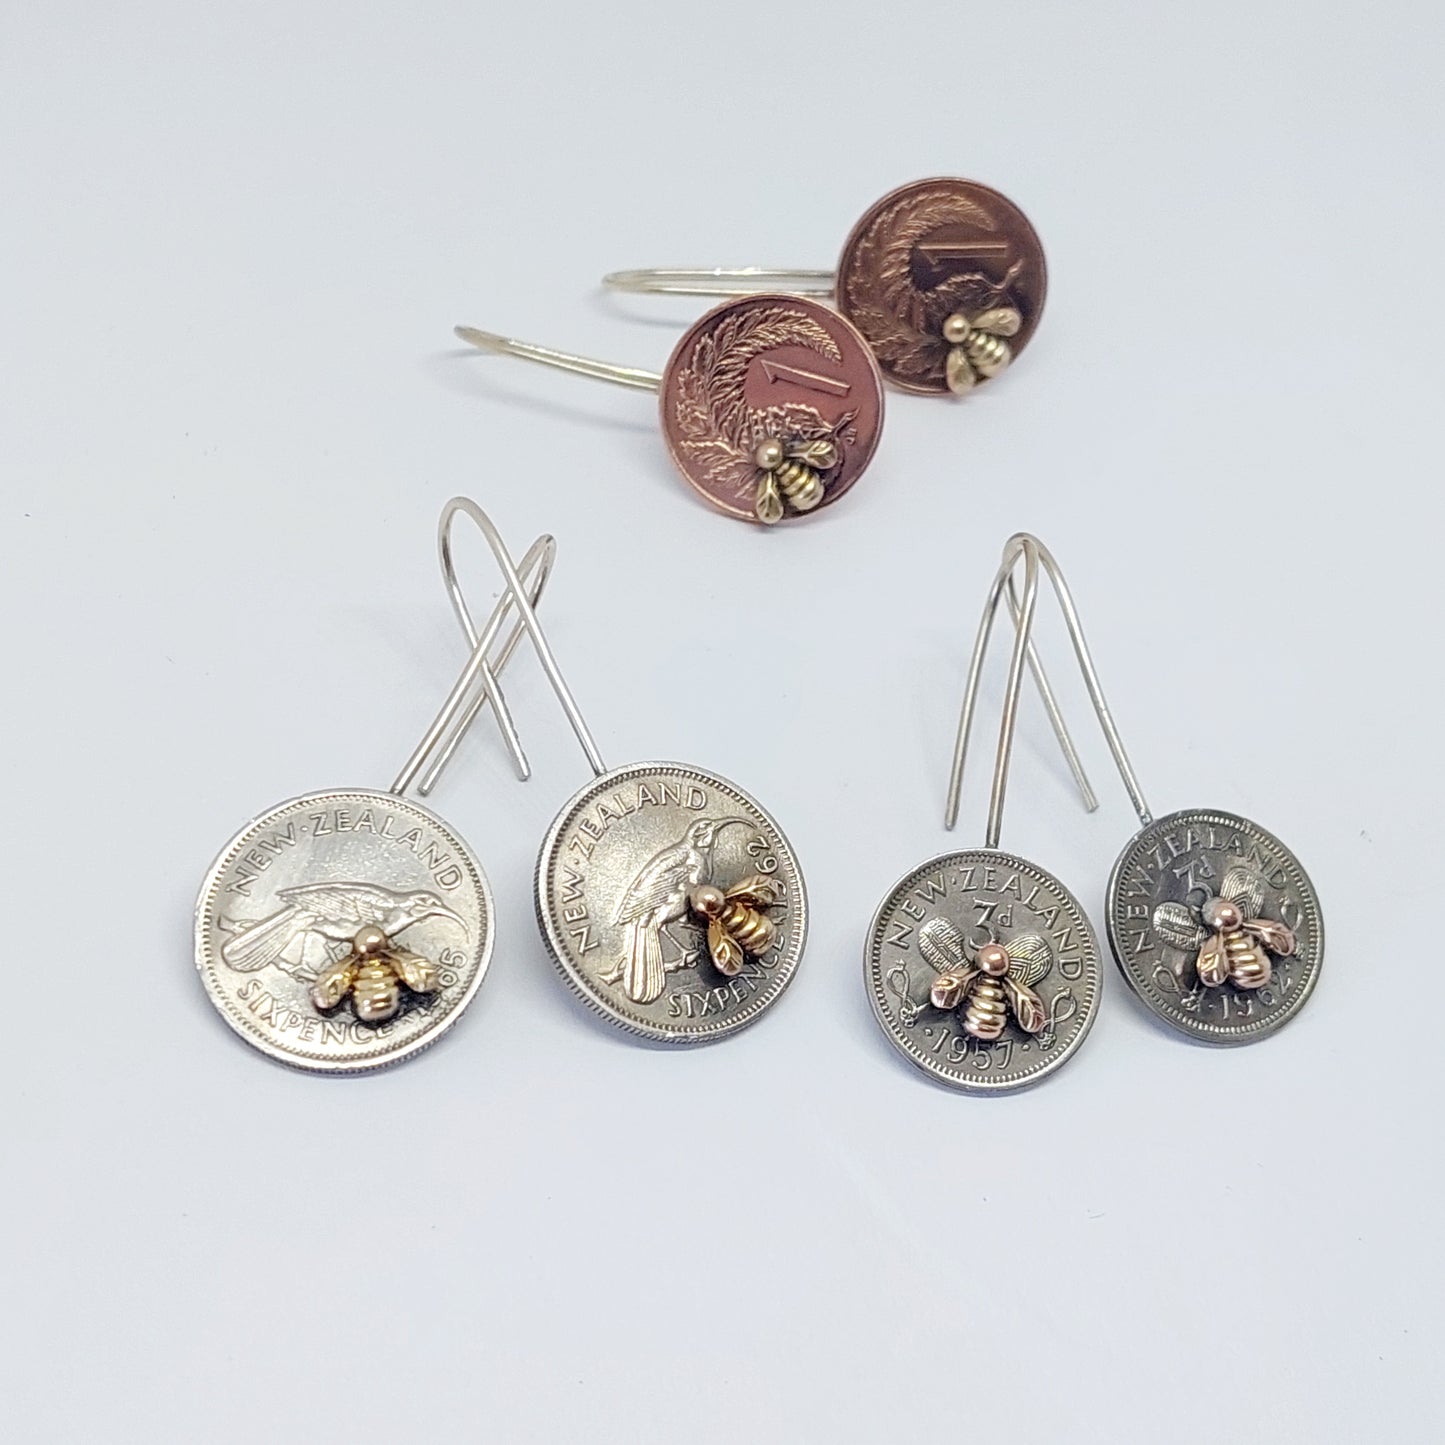 NEW!! Re-minted Artisan Coin Earrings with Tiny Bees - One Cent